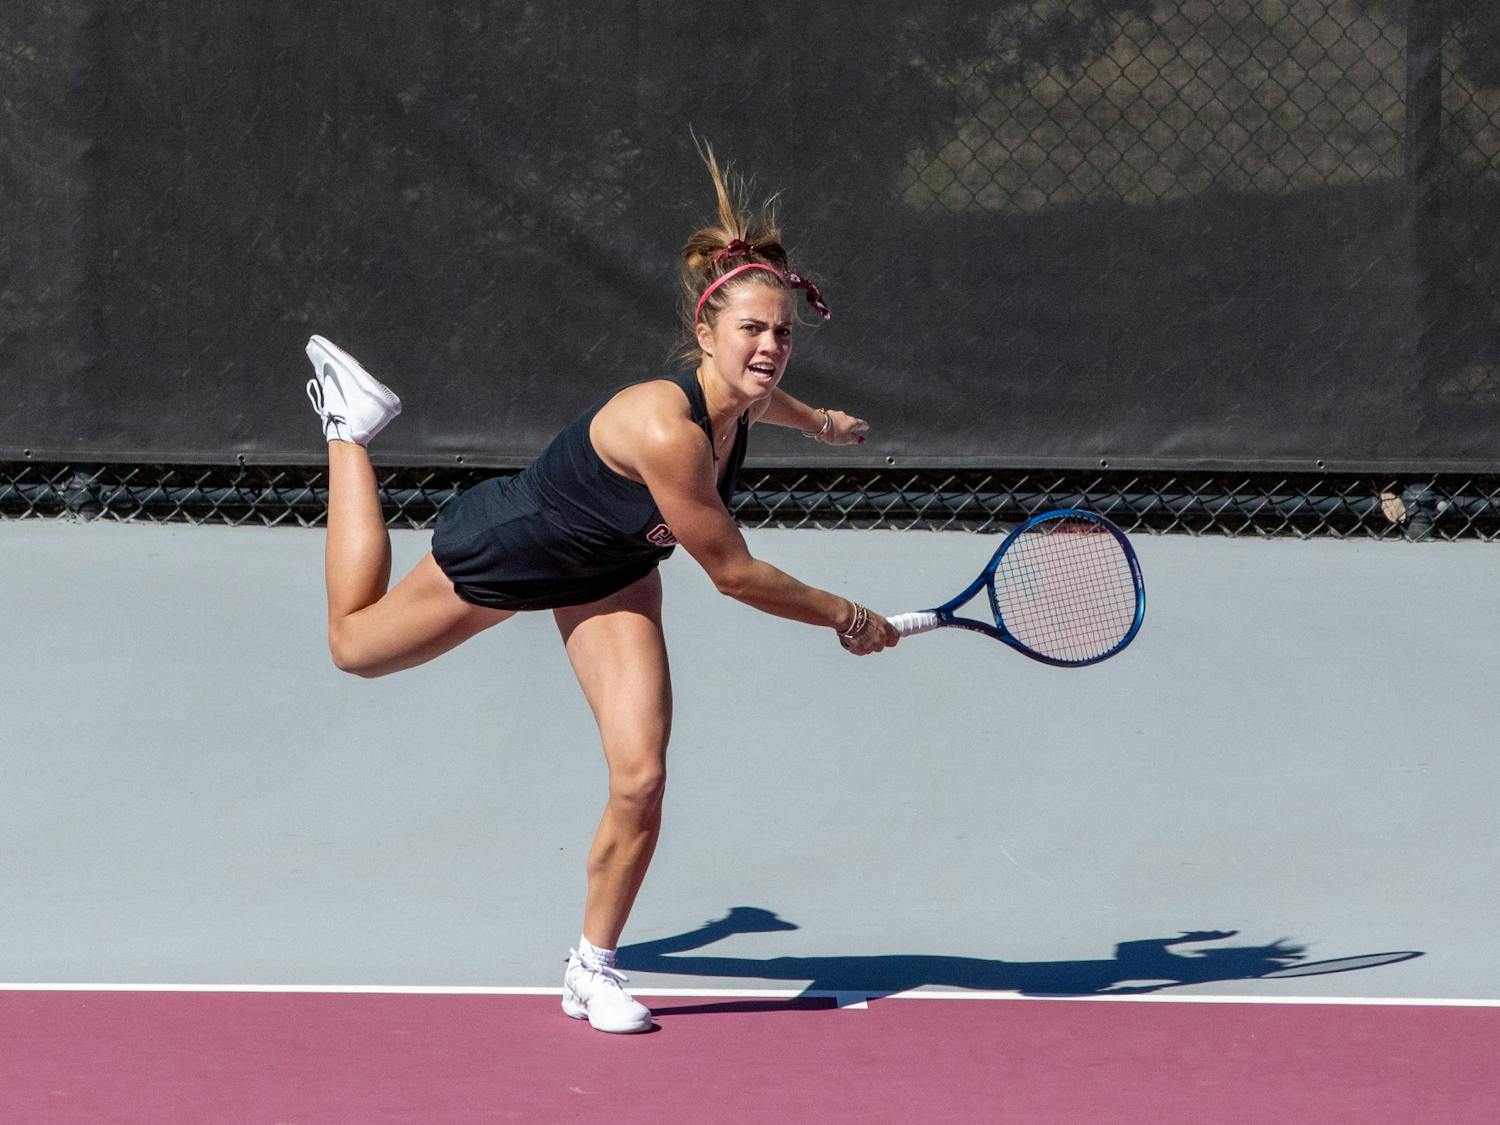 Freshman Sarah Hamner serves during a singles match against Clemson on Sunday, Feb. 20, 2022. The Gamecocks won both matches of the doubleheader, beating Clemson 4-2, and Charleston Southern 6-1.&nbsp;